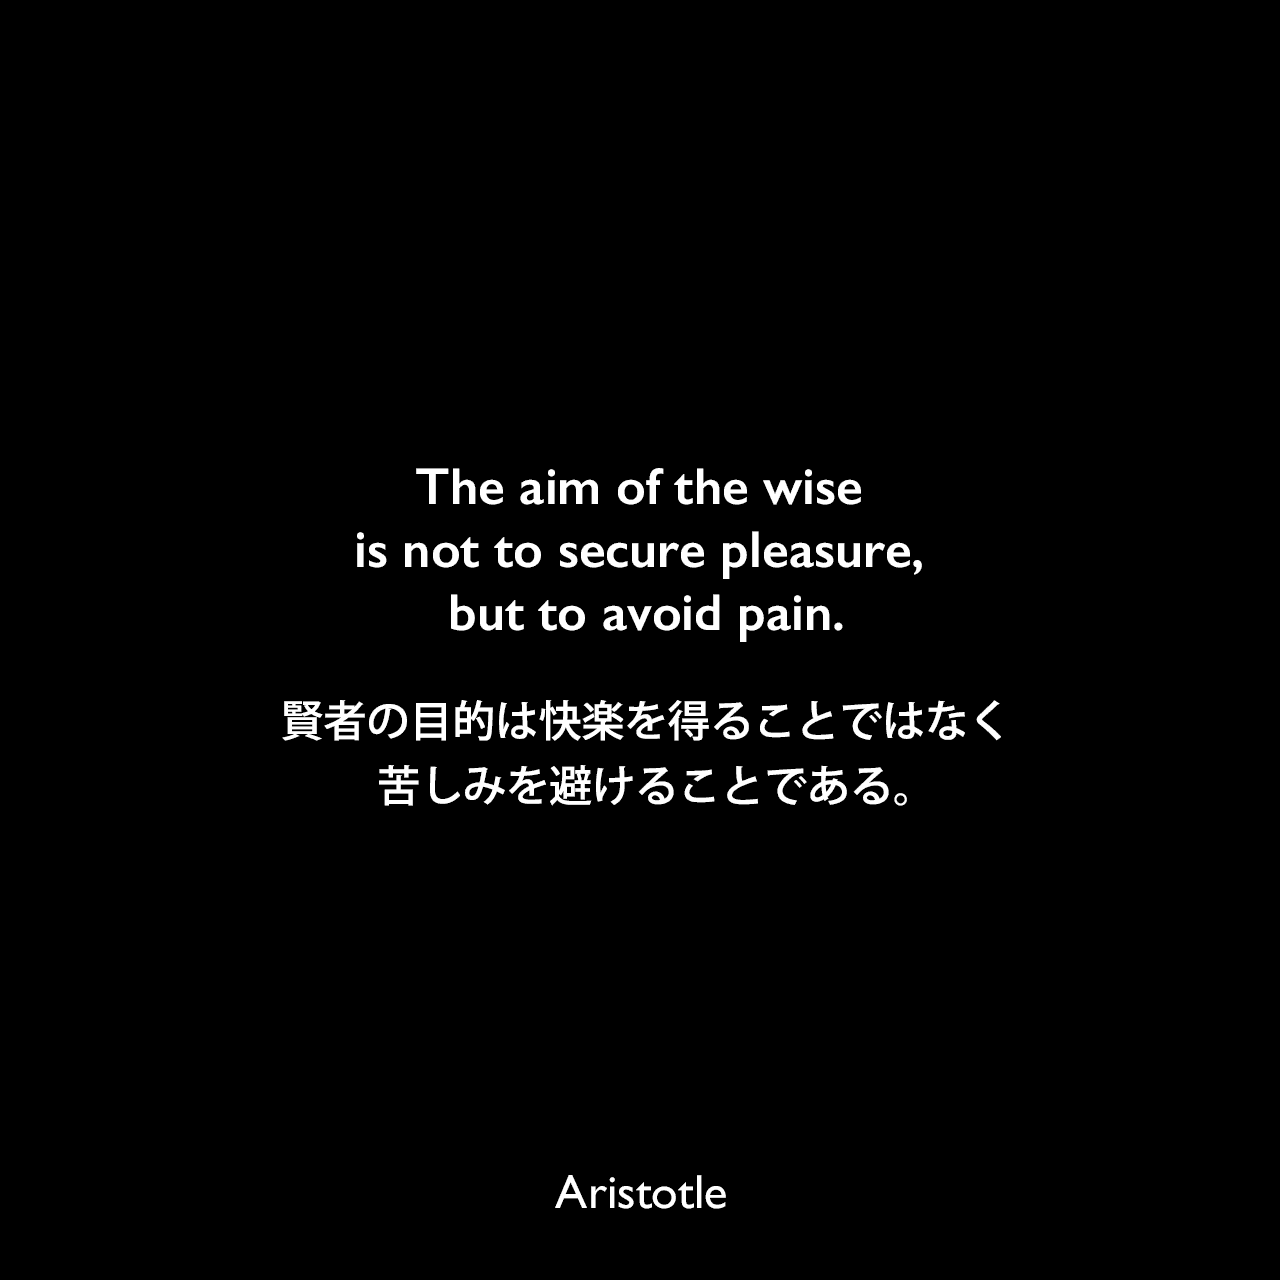 The aim of the wise is not to secure pleasure, but to avoid pain.賢者の目的は快楽を得ることではなく、苦しみを避けることである。